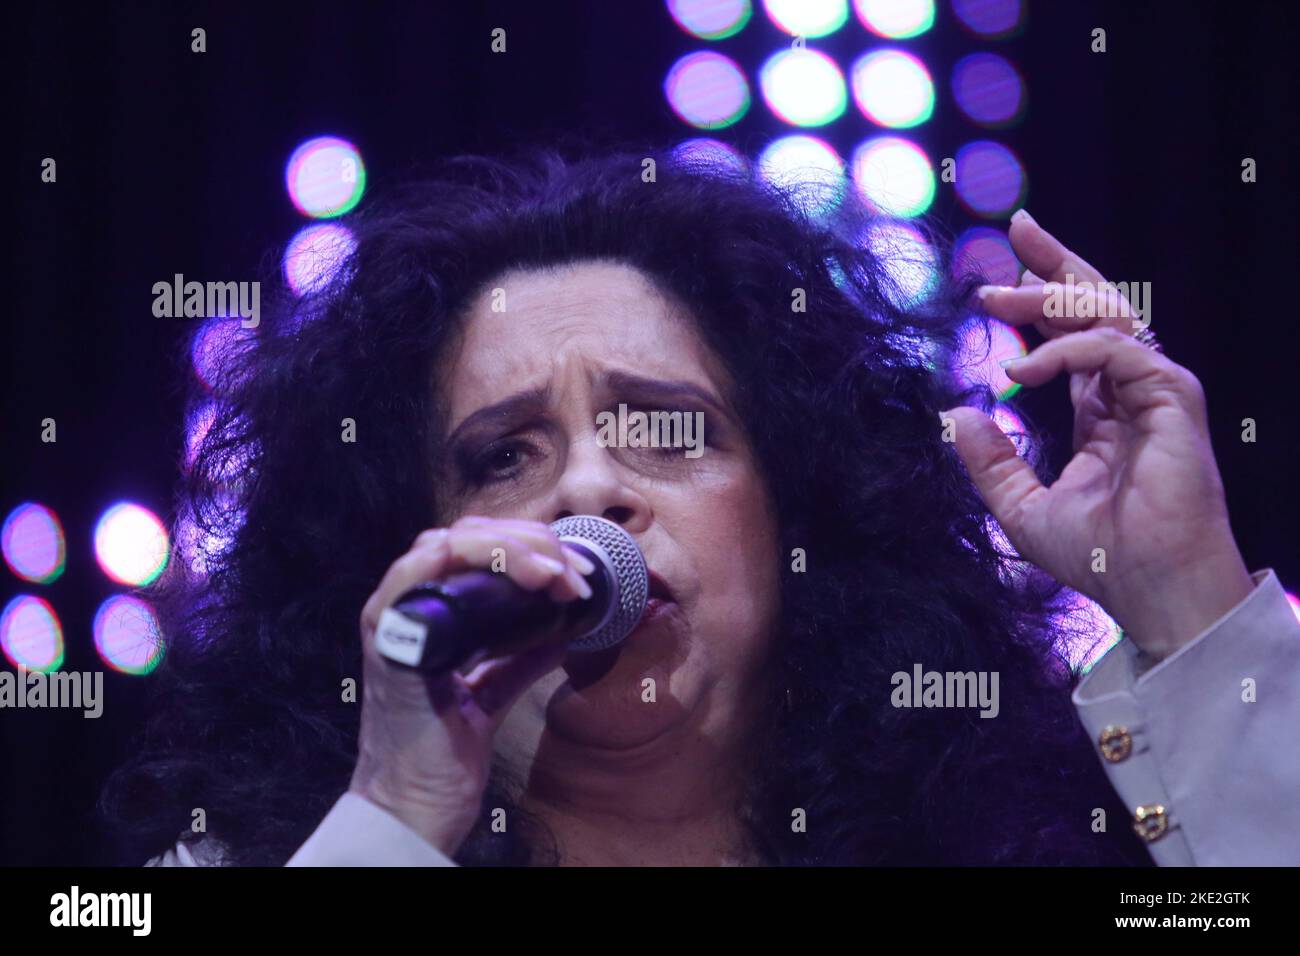 Sao Paulo, Brazil. 30th Nov, 2013. Brazilian singer Gal Costa died at the age of 77. The information was confirmed by the singer's advice on Wednesday (9). She had taken a break from concerts after undergoing surgery to remove a lump in her nasal cavity. Archive of 11/30/2013 - during the show with Hologram by singer Cazuza during tribute in his honor, held at Parque da Juventude, north of São Paulo. (Photo: Vanessa Carvalho/Brazil Photo Press) Credit: Brazil Photo Press/Alamy Live News Stock Photo